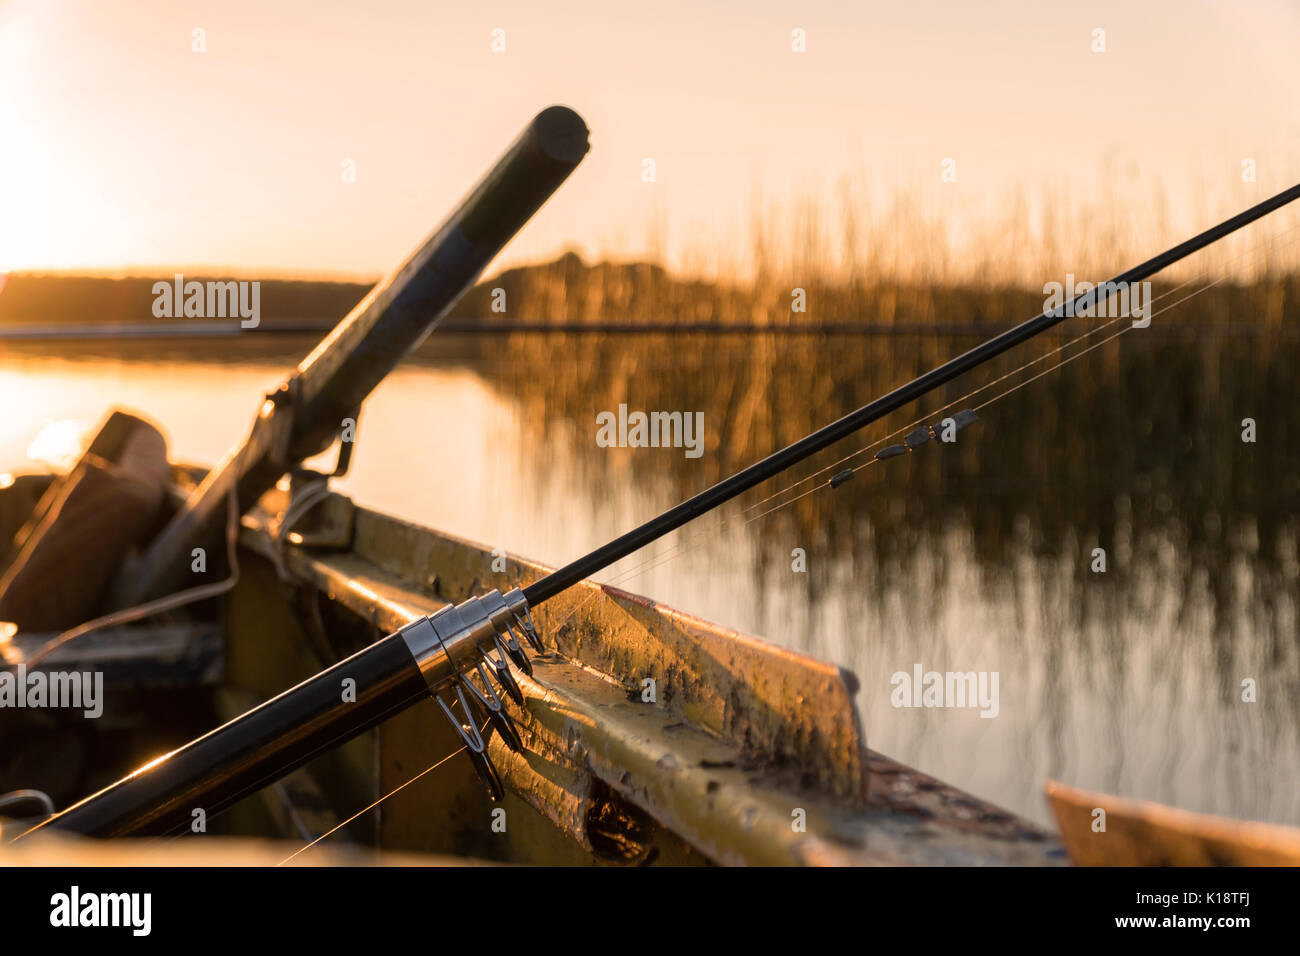 A broken fishing rod lies at the side of the boat at sunset Stock Photo -  Alamy